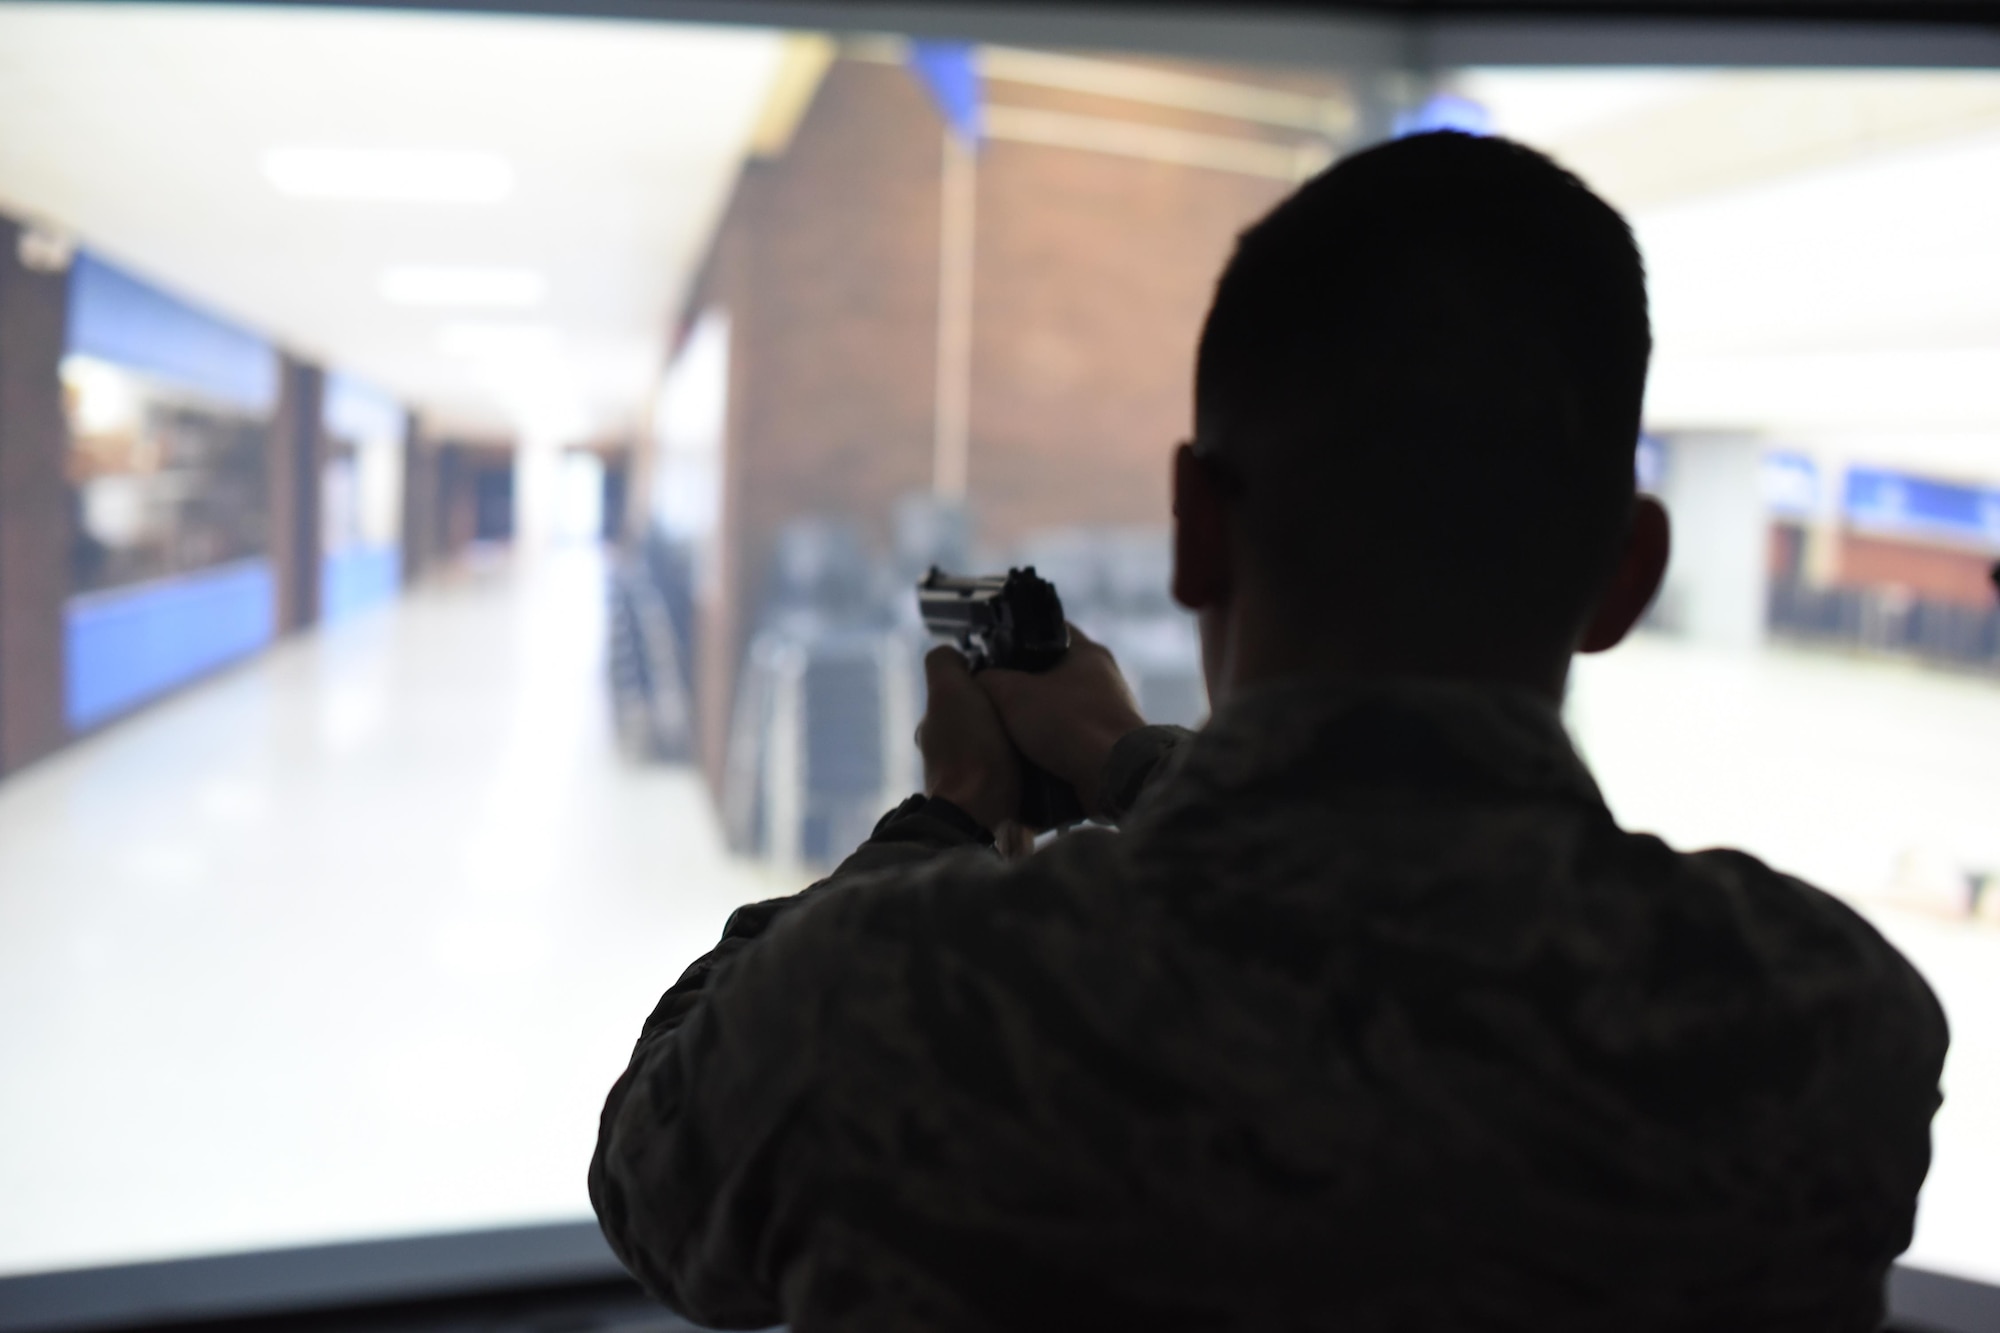 Airman 1st Class Alexander Morales, 22nd Security Forces Squadron patrolman, clears a hall during an active-shooter exercise with the Milo Range Training System, Feb. 1, 2017, at McConnell Air Force Base, Kan. It is the 22nd Security Forces Squadron’s responsibility to respond if or when a dire situation arises. To ensure the best result unfolds, they invested in their capabilities by bringing the new training system to the unit. (U.S. Air Force photo/Senior Airman Christopher Thornbury)